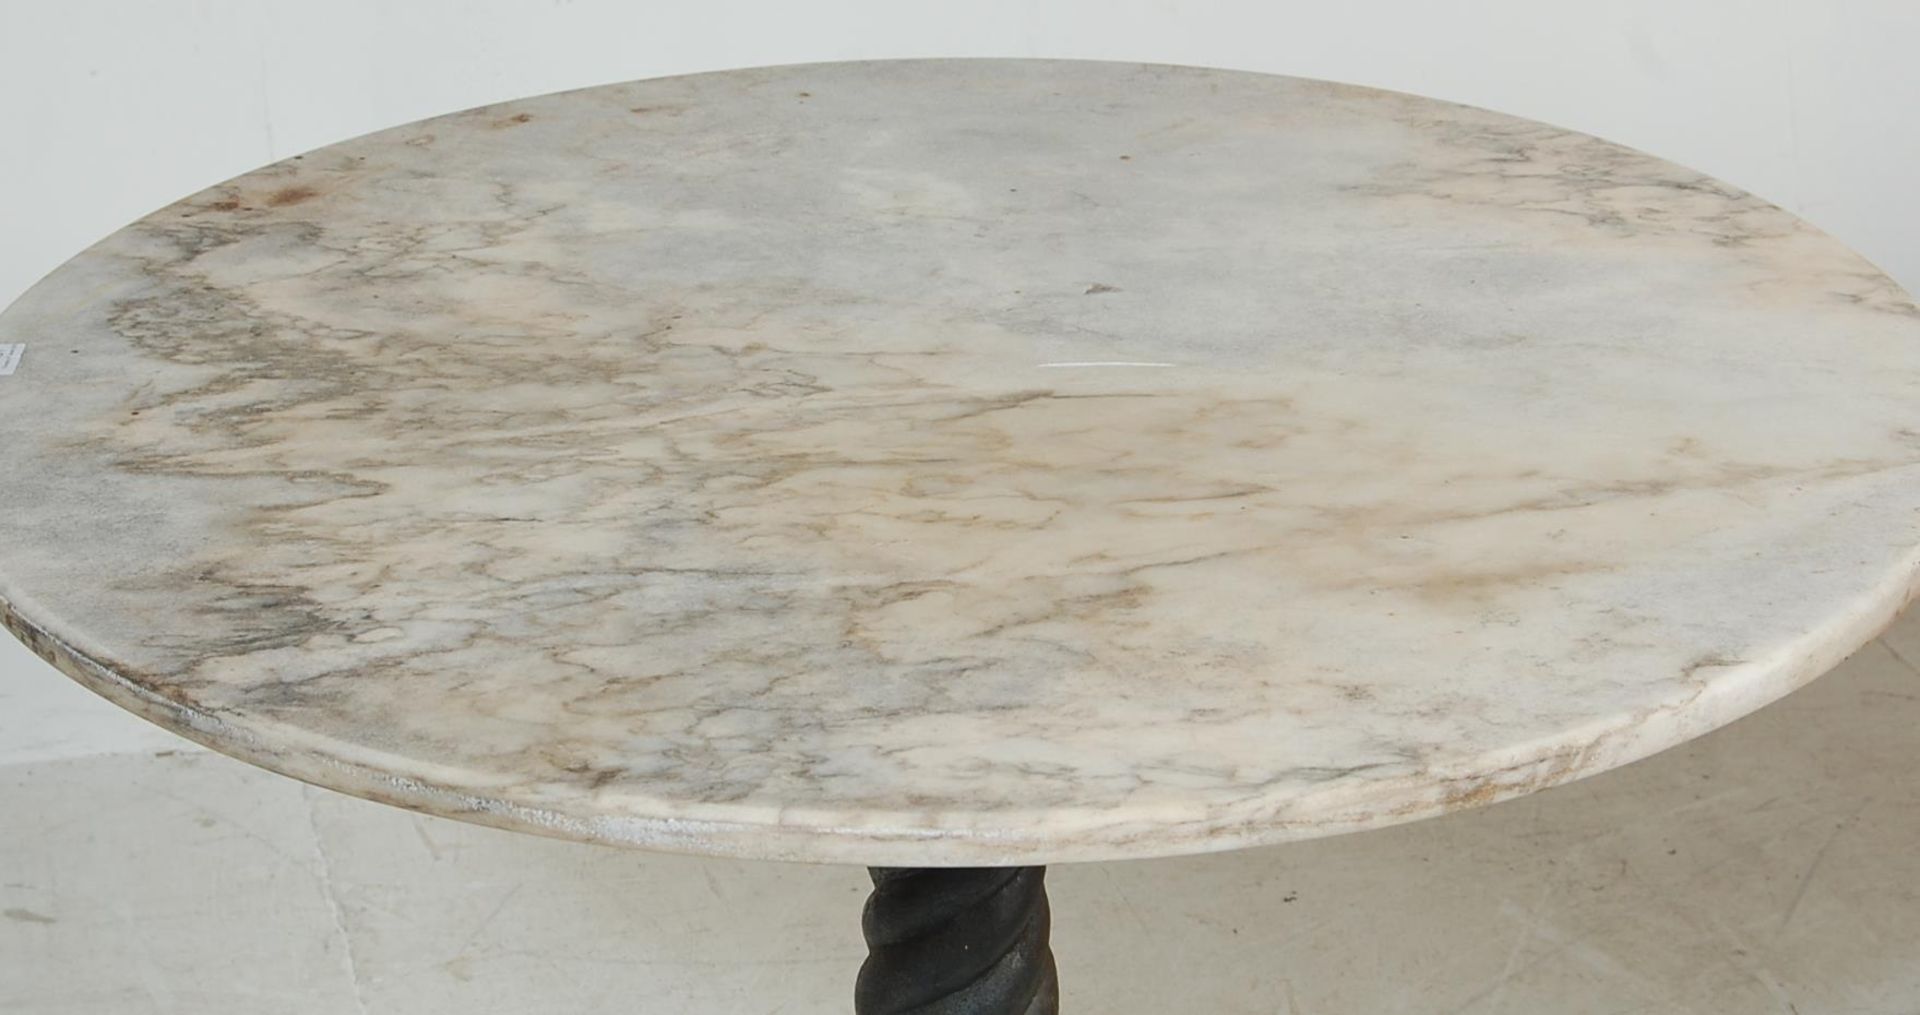 ANTIQUE 20TH CENTURY CAST IRON AND MARBLE GARDEN TABLE - Image 2 of 4